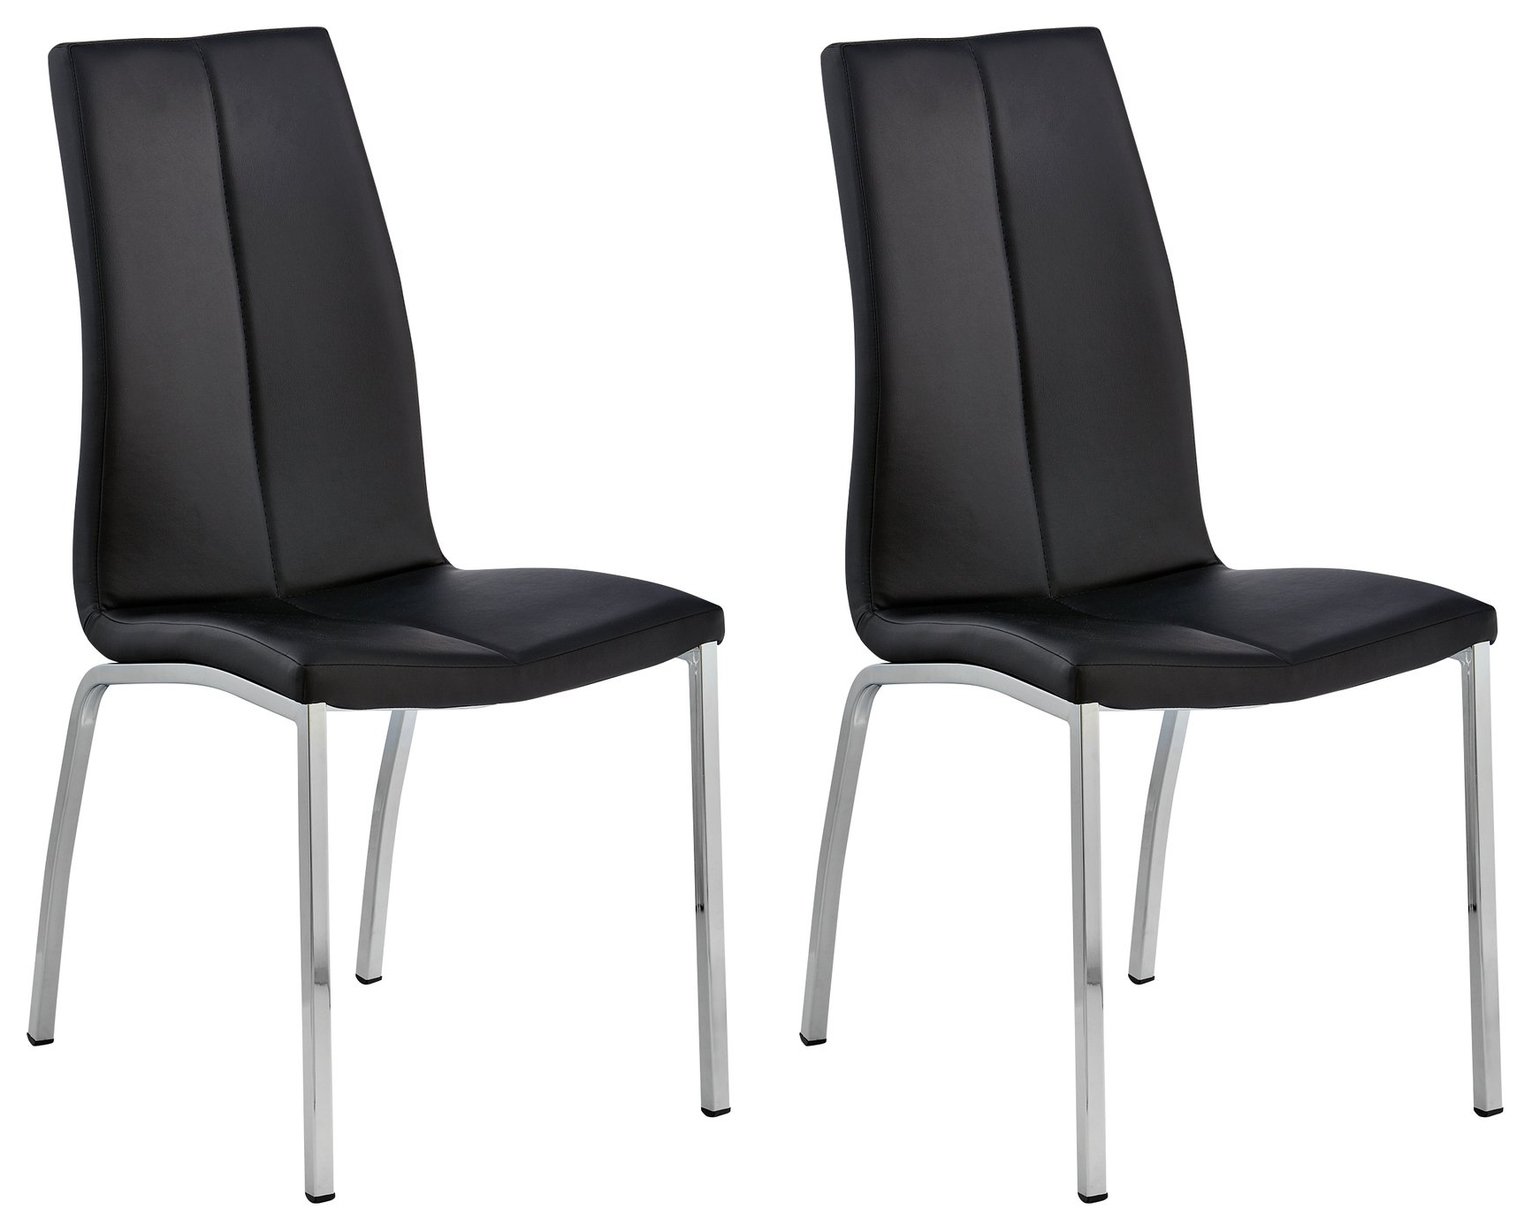 Argos Home Milo Pair of Curve Back Chairs - Black